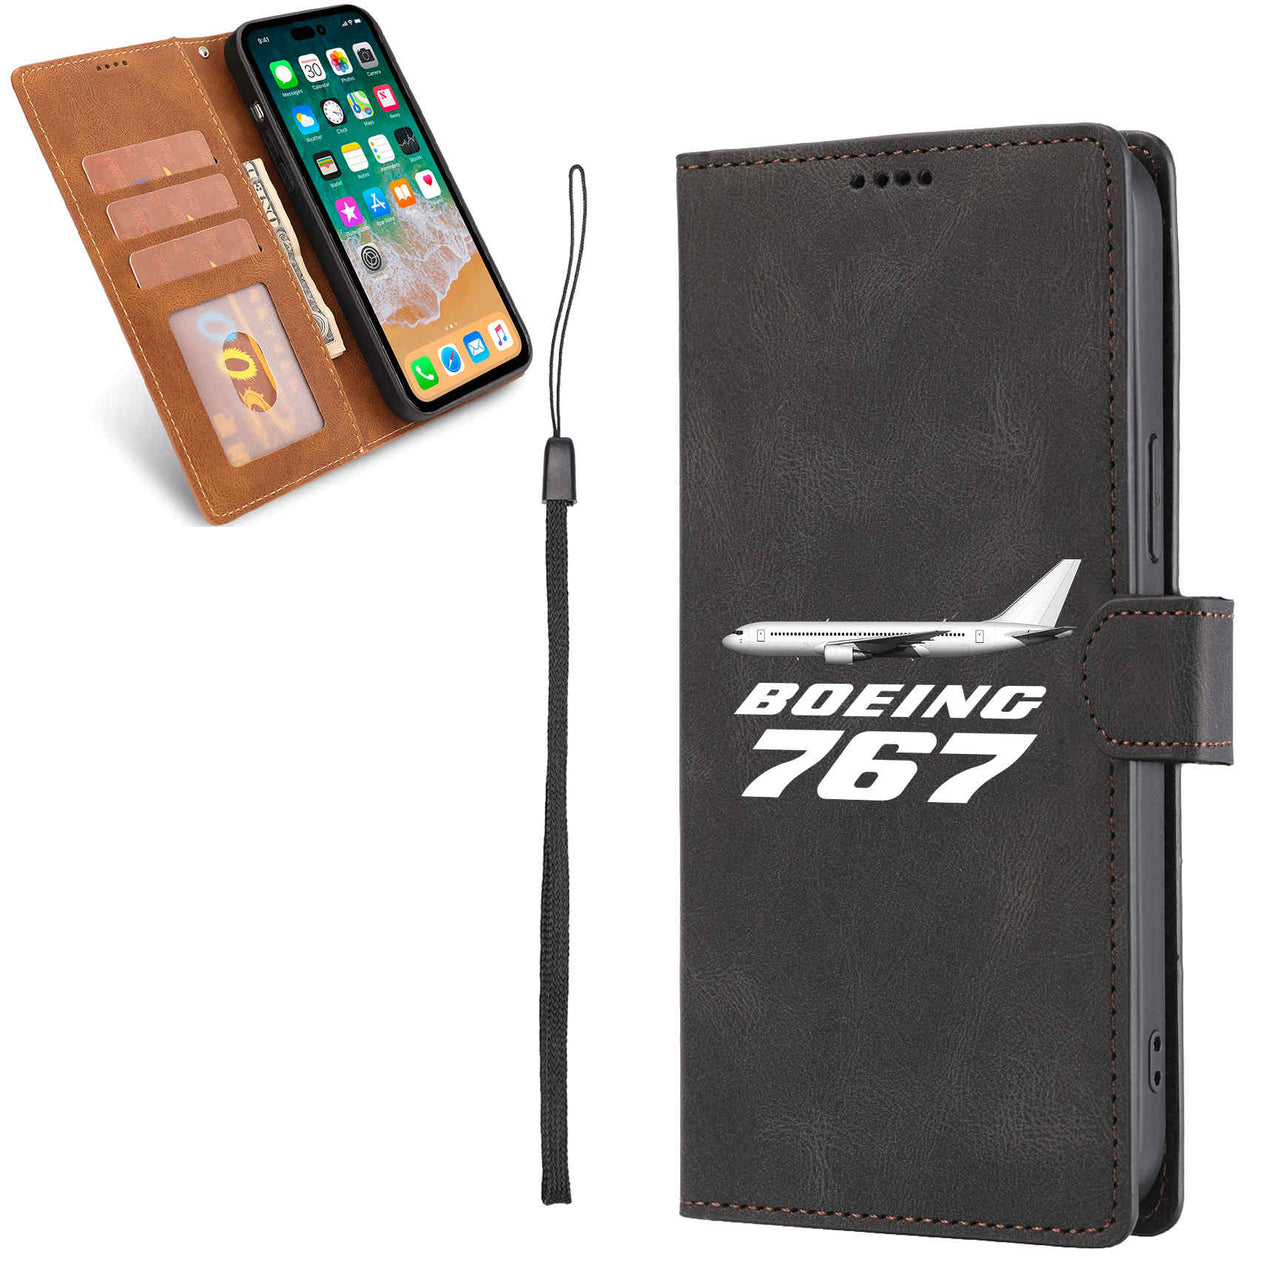 The Boeing 767 Designed Leather Samsung S & Note Cases